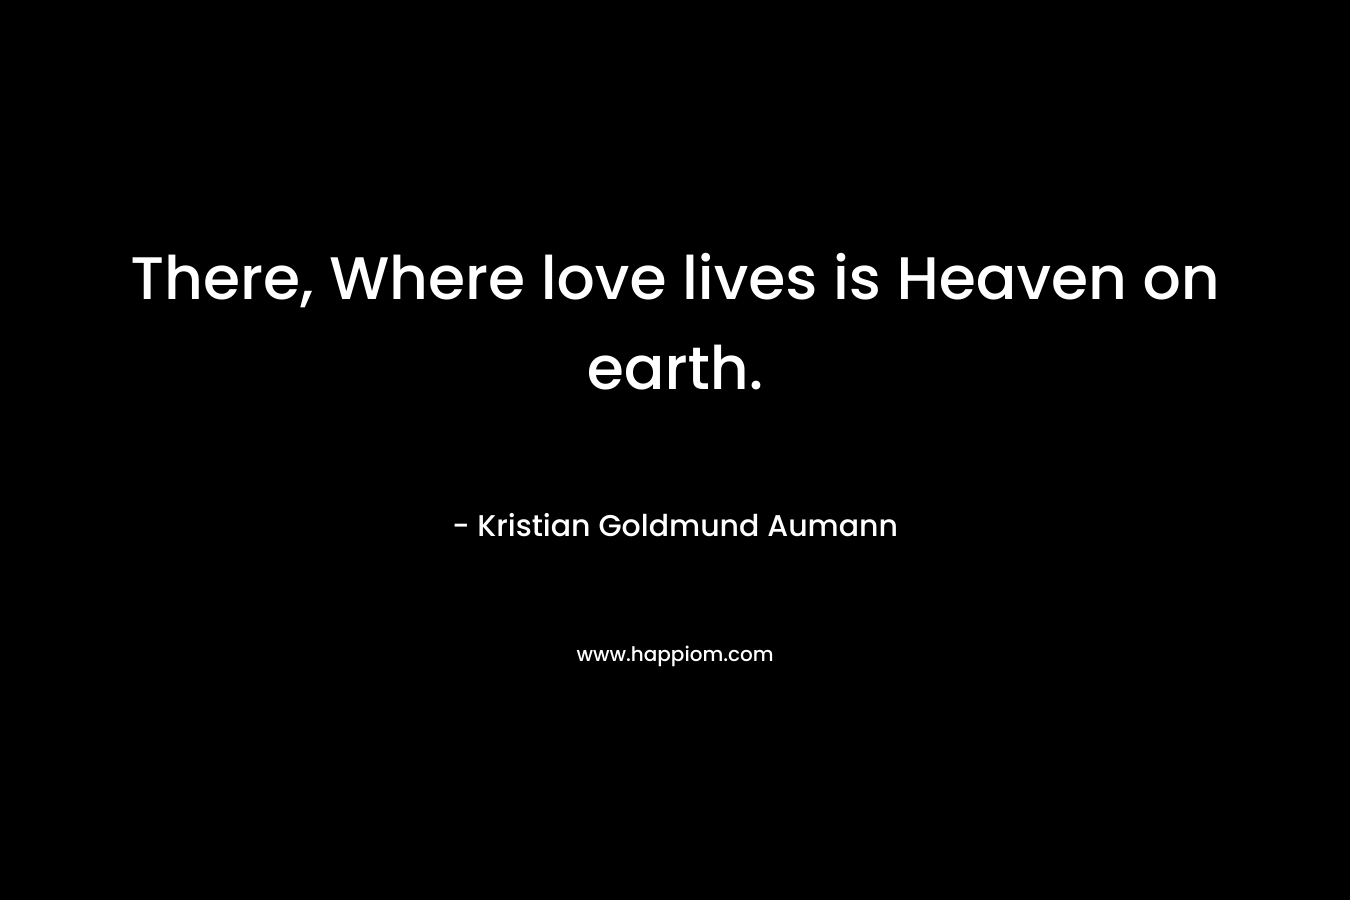 There, Where love lives is Heaven on earth.